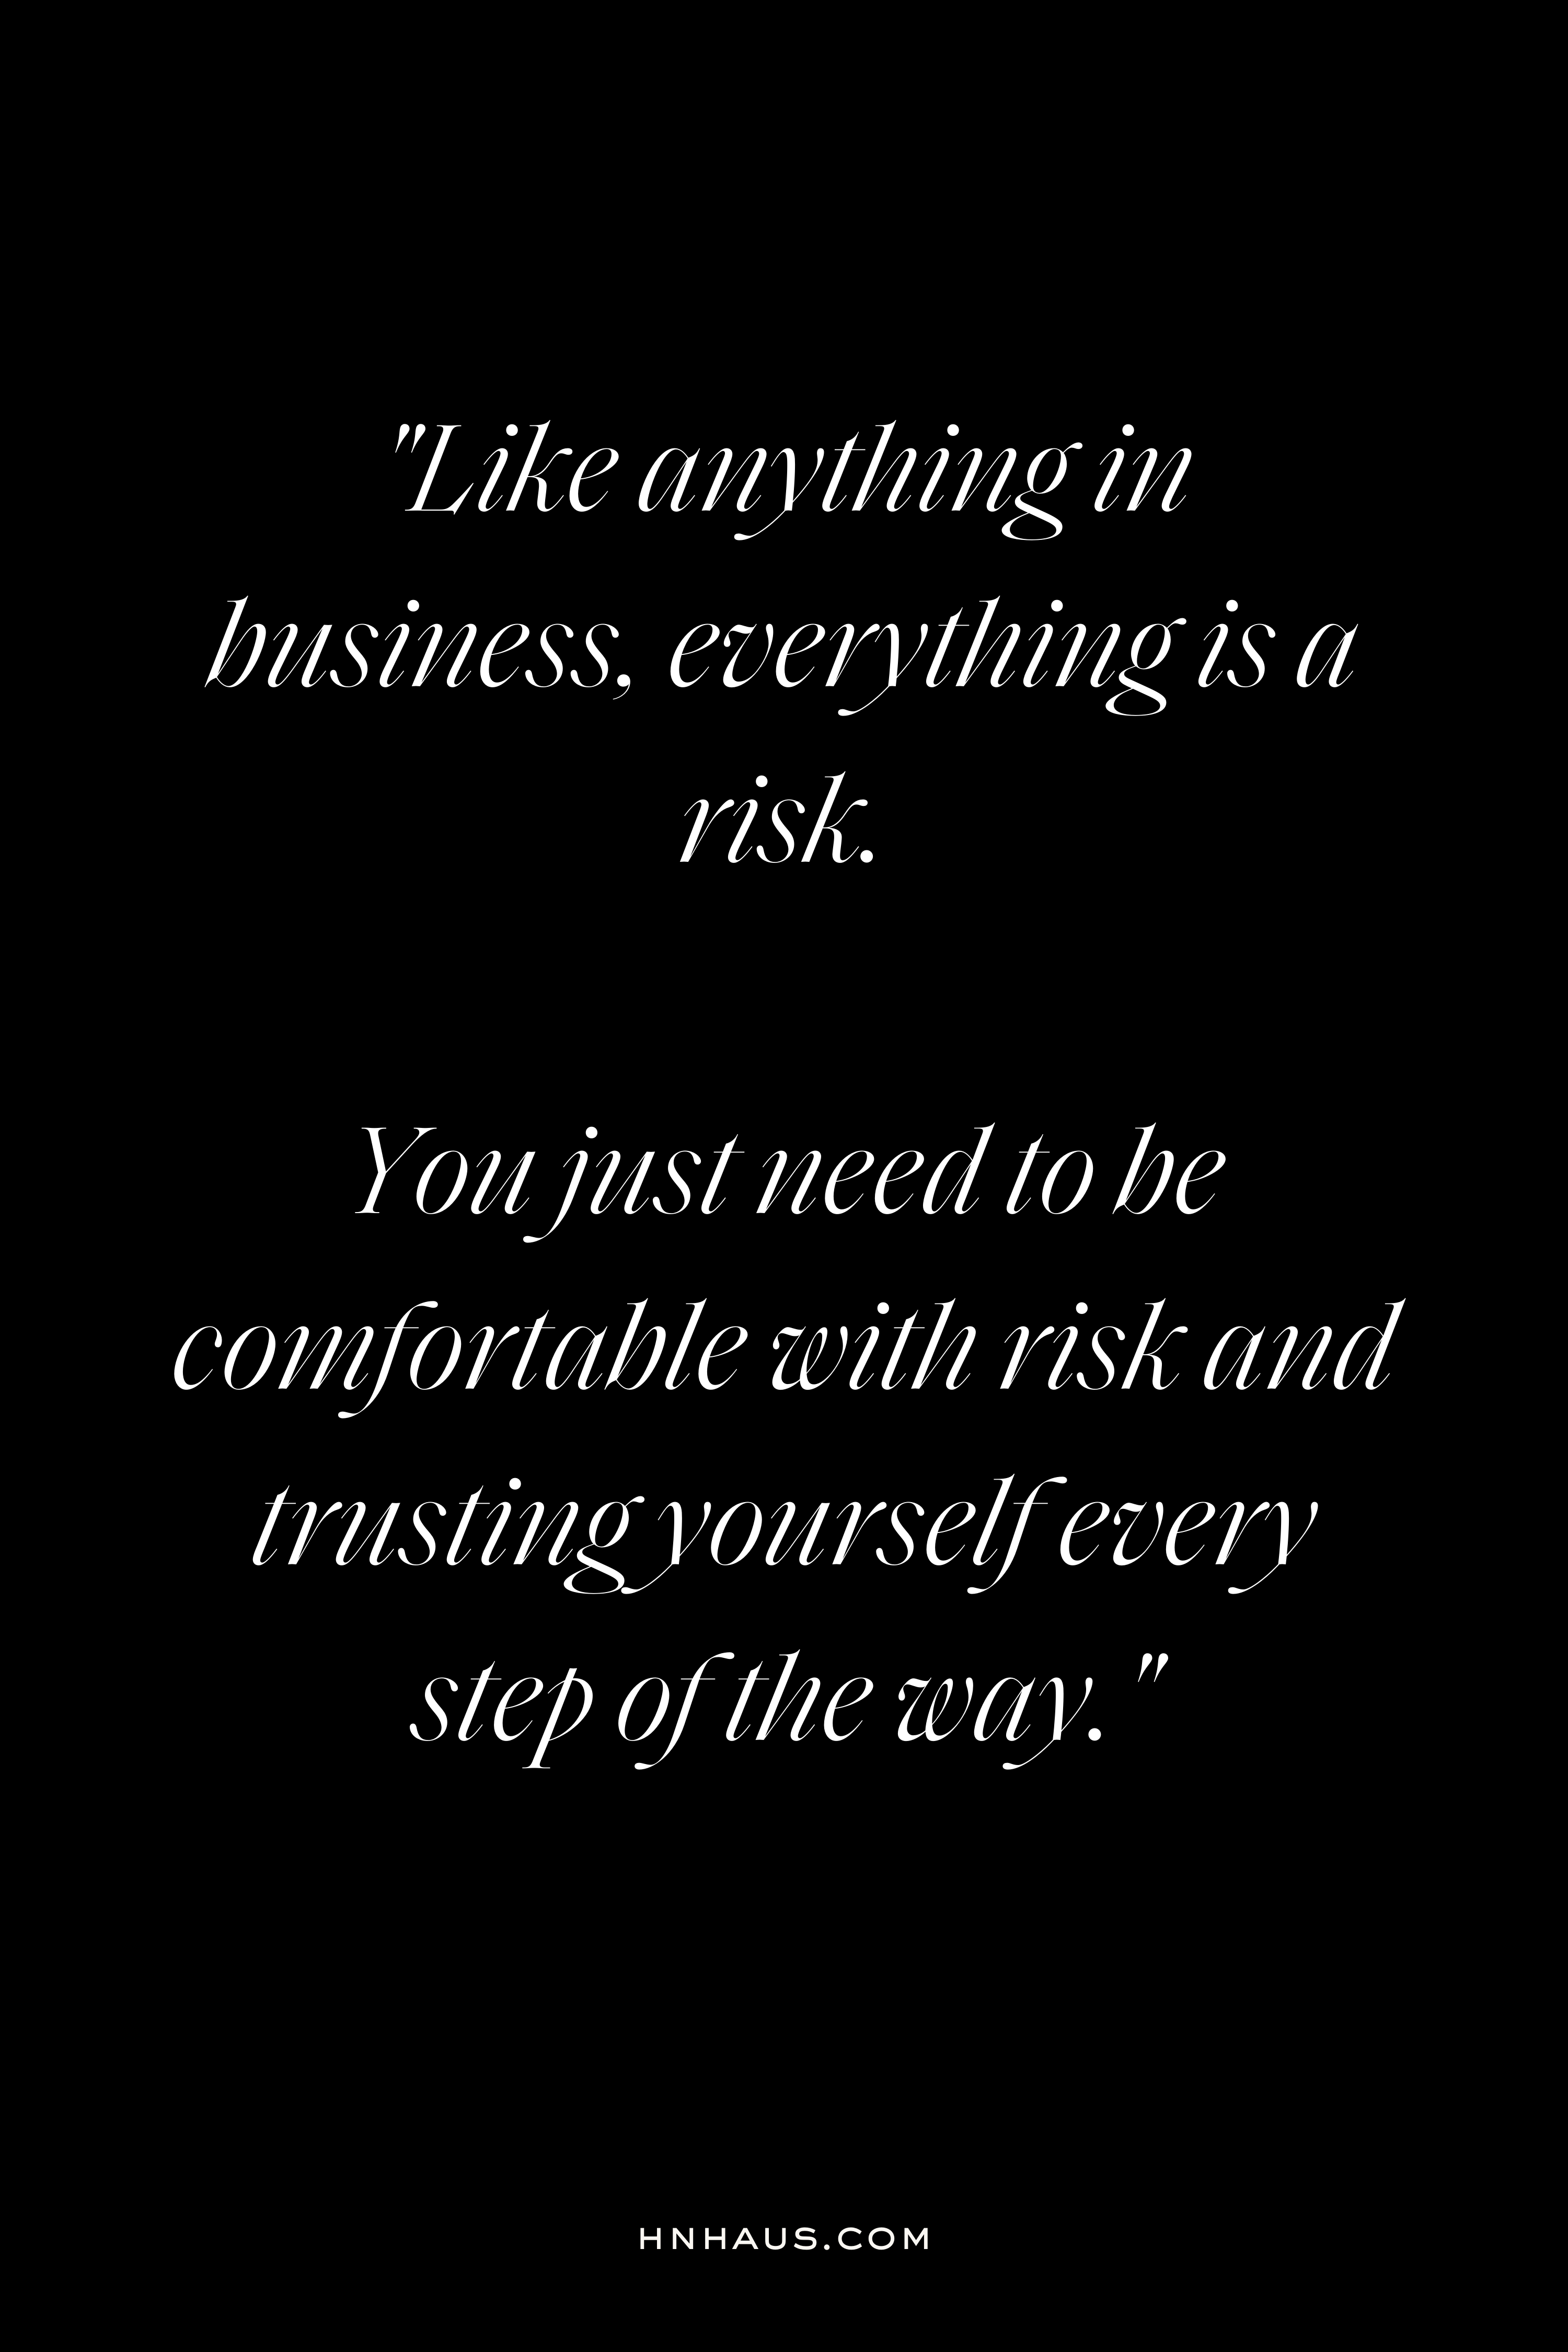 Business is a Risk - How to Launch a Brick and Mortar